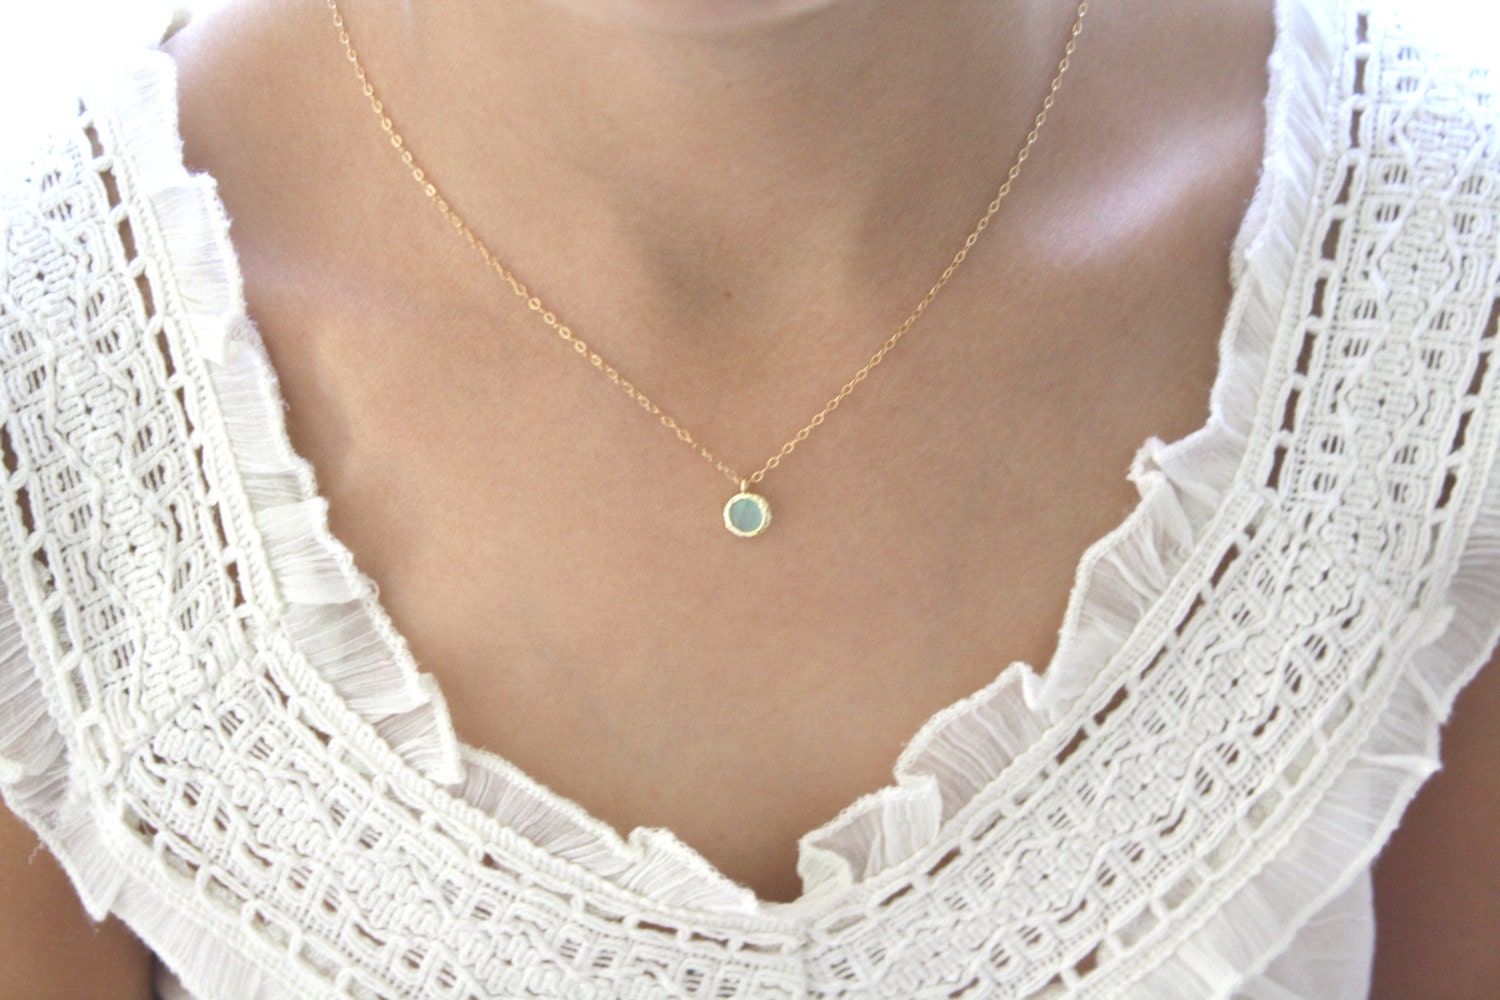 Gold Necklace, Mint Necklace, Bridesmaid Necklace, Mint Wedding, Christmas Gift, Best Friend Gift, Girlfriend Gifts, Gifts for Her, Teens